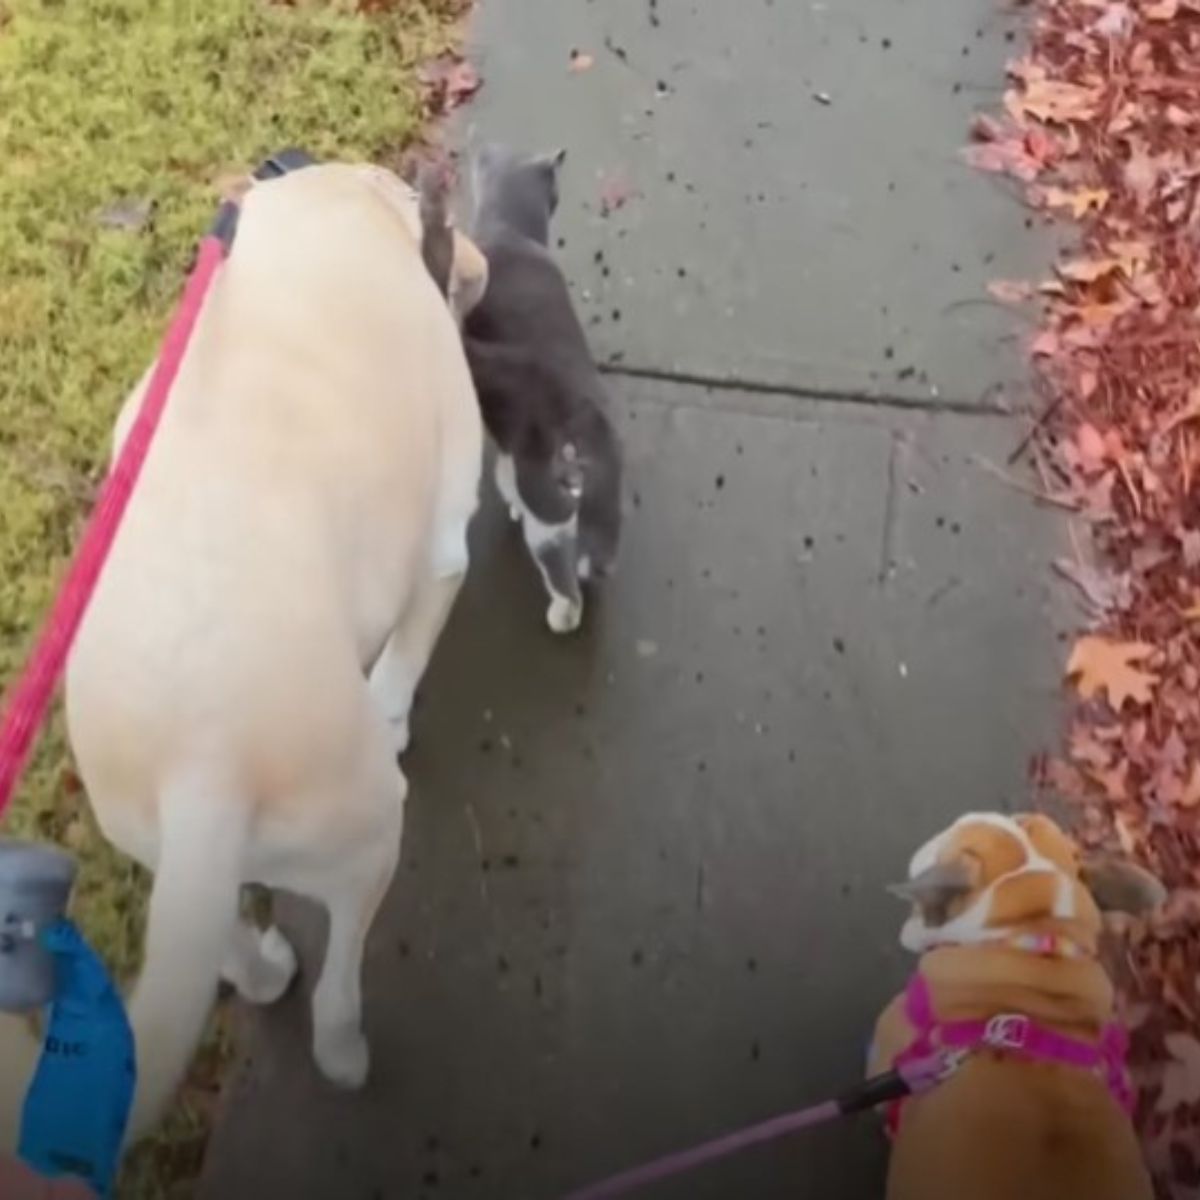 stalker brings dogs and cat in a walk